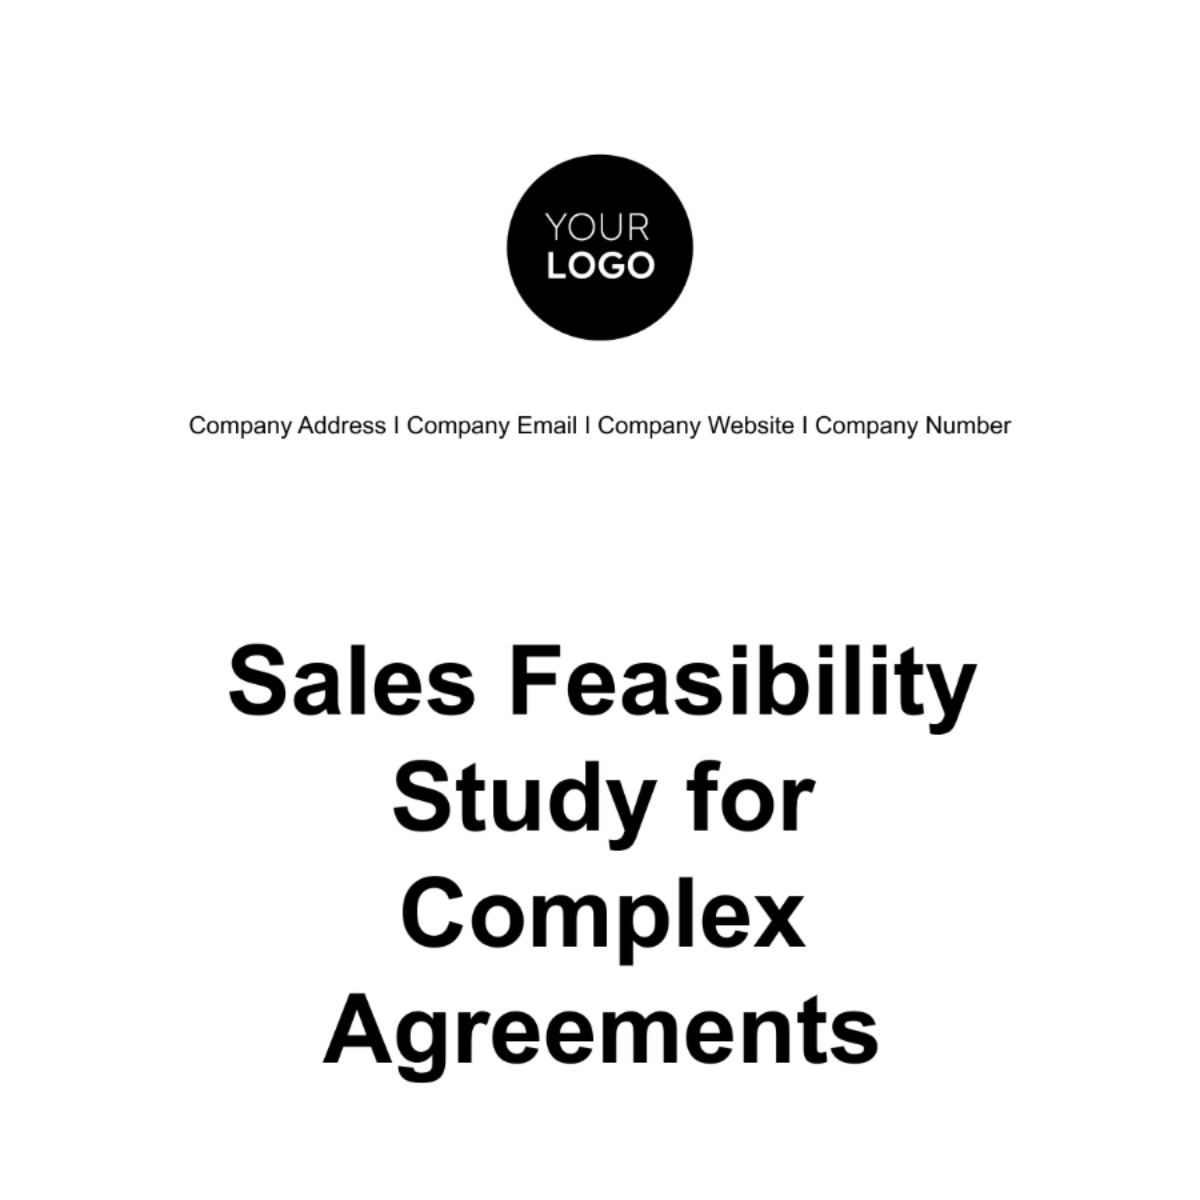 Free Sales Feasibility Study for Complex Agreements Template